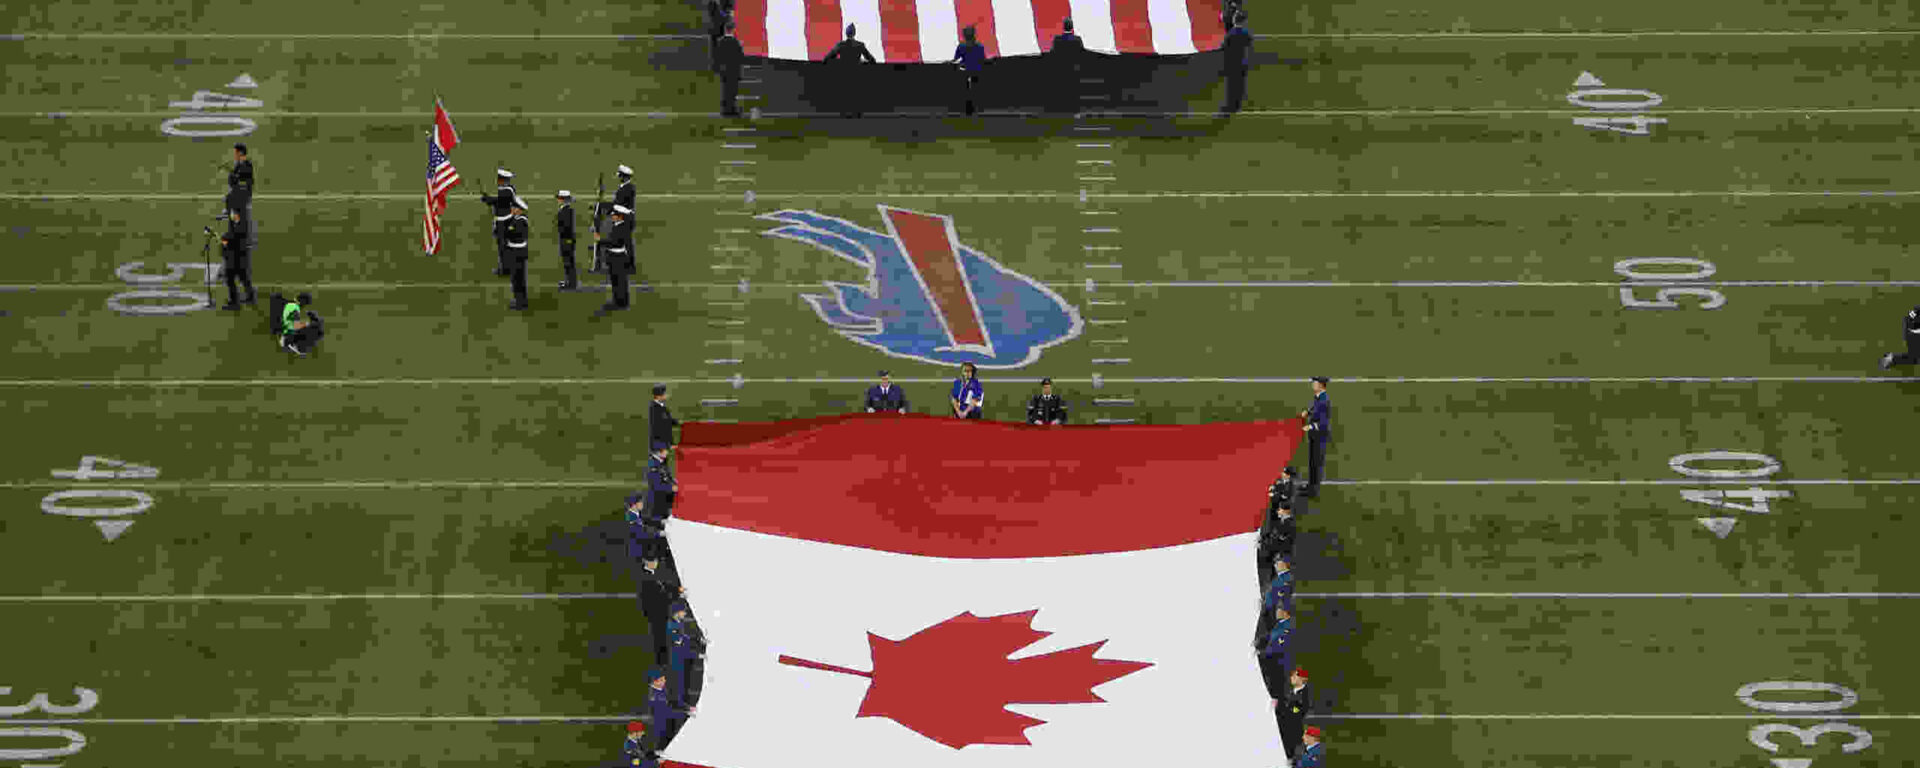 The American and Canadian flags unfurled during an NFL game